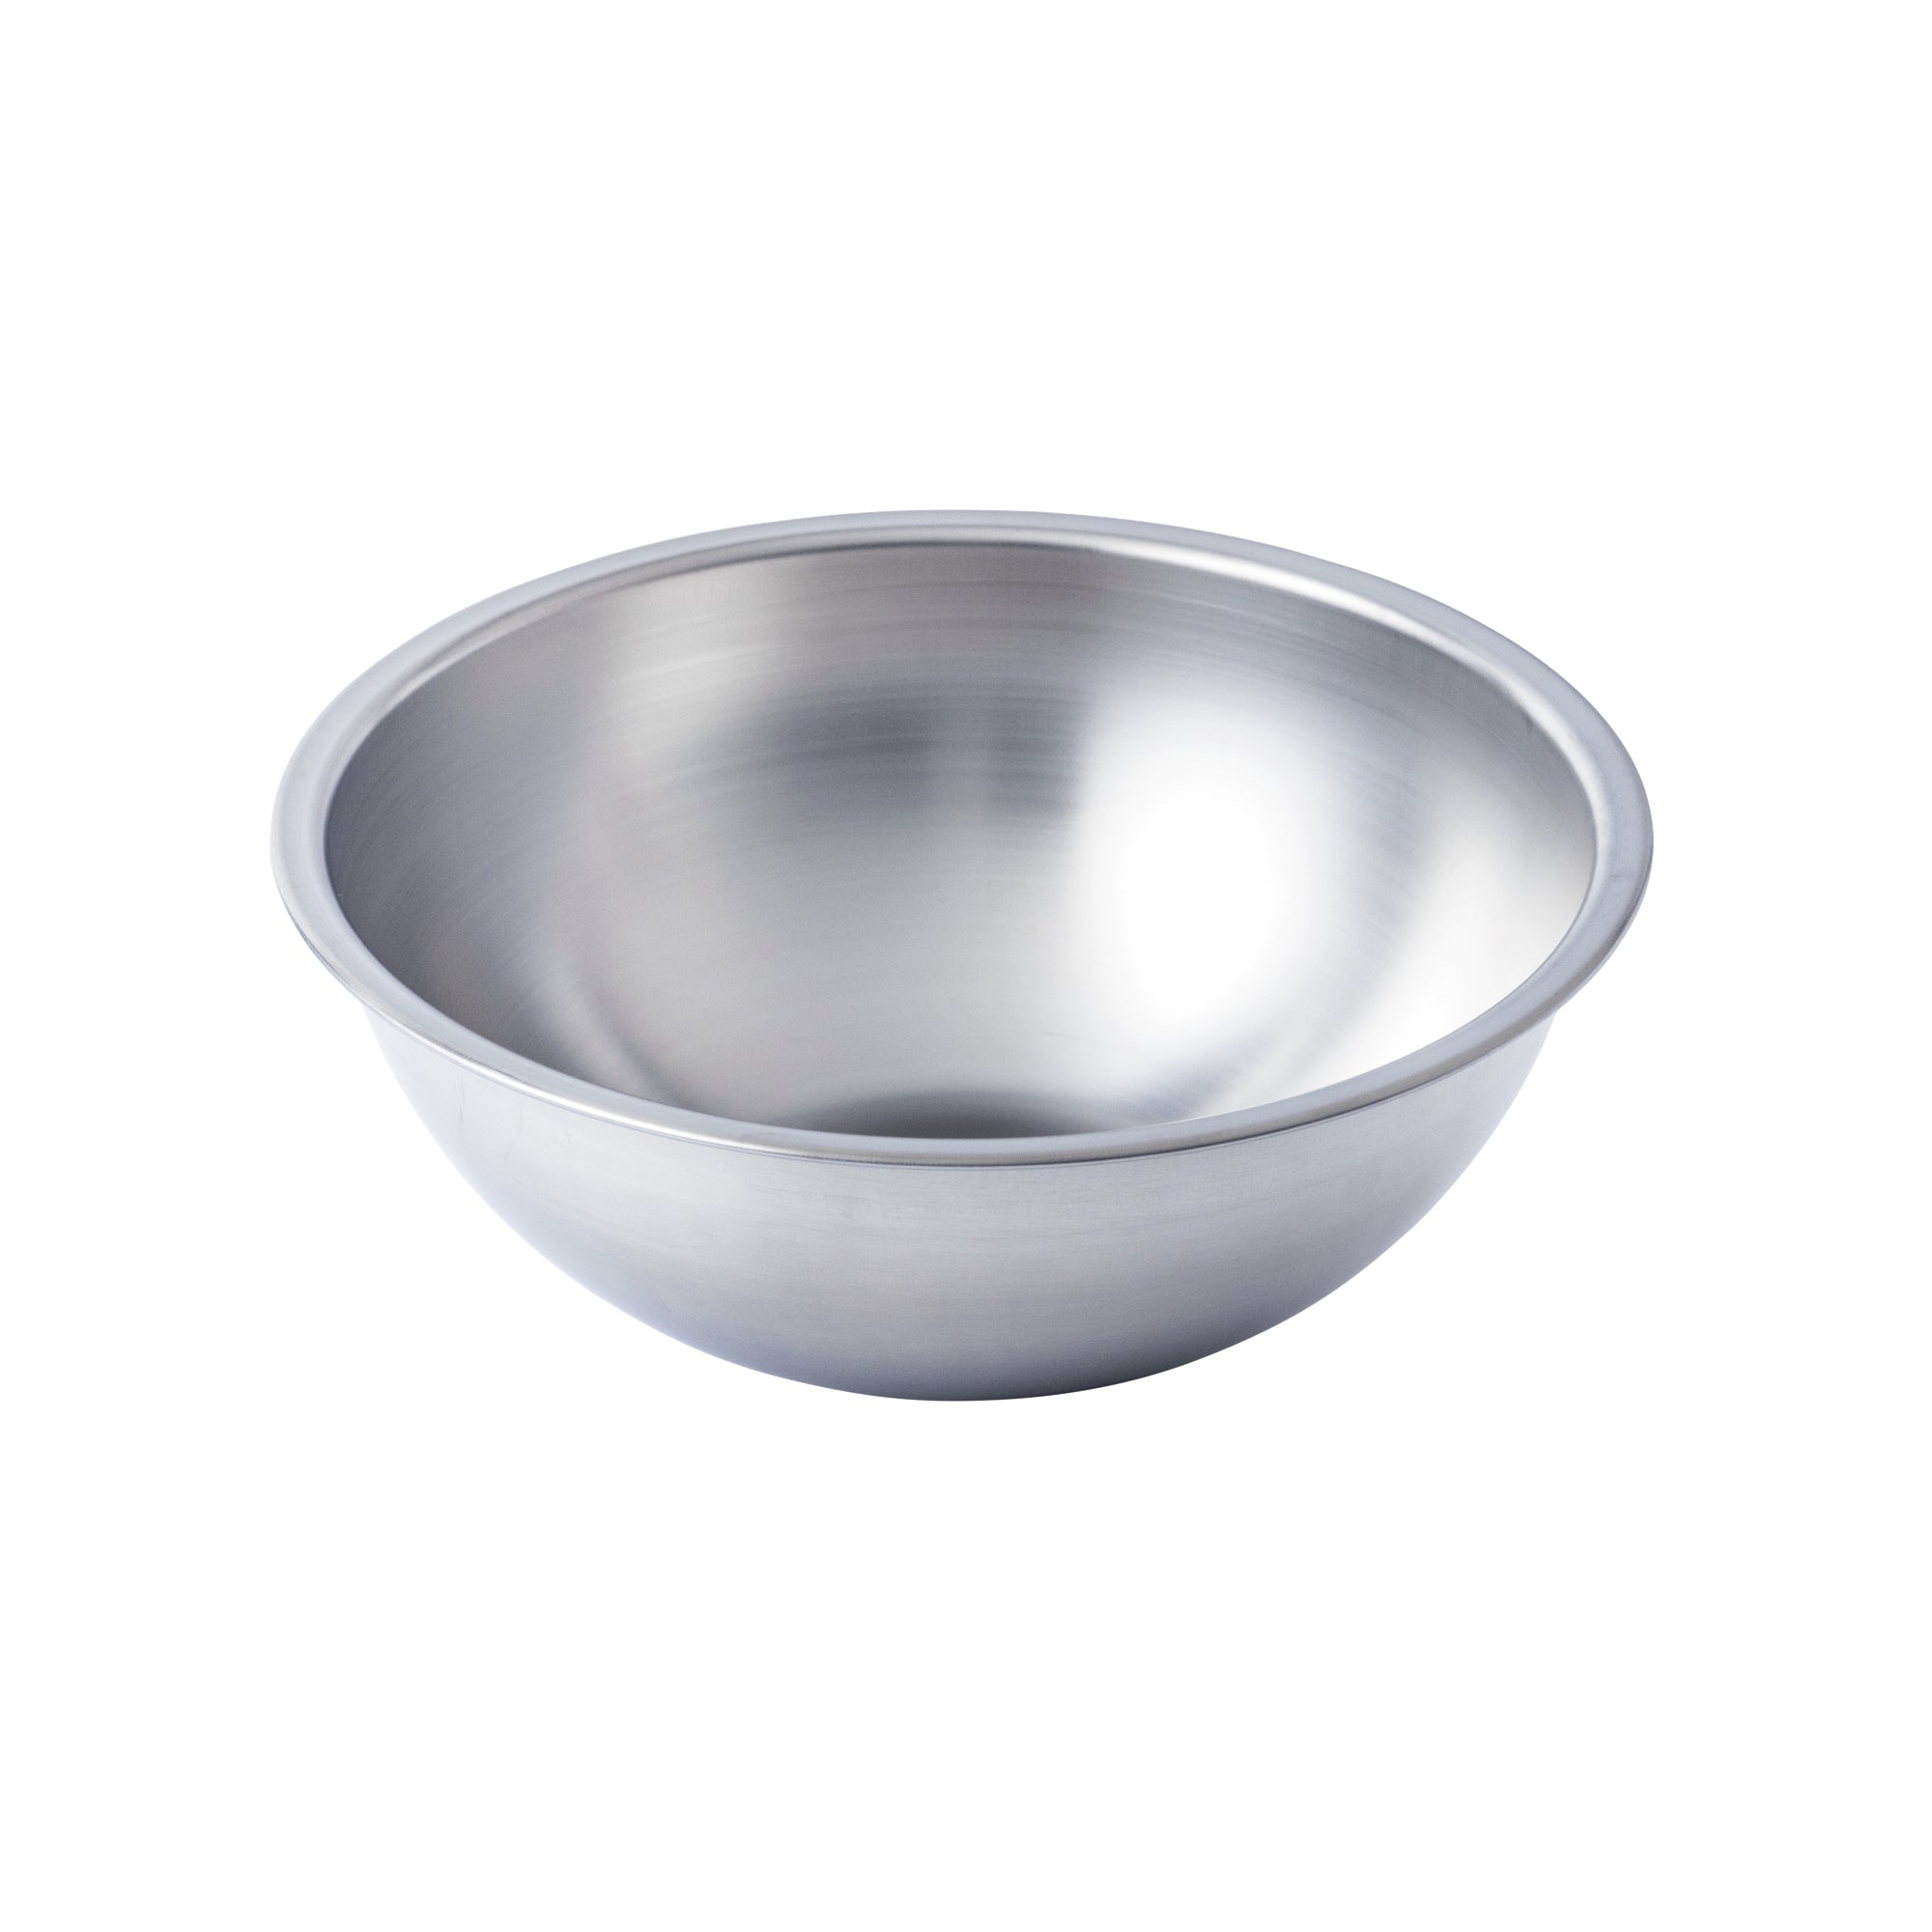 Workhorse Stainless Steel Mixing Bowls - Made in the USA – Basis